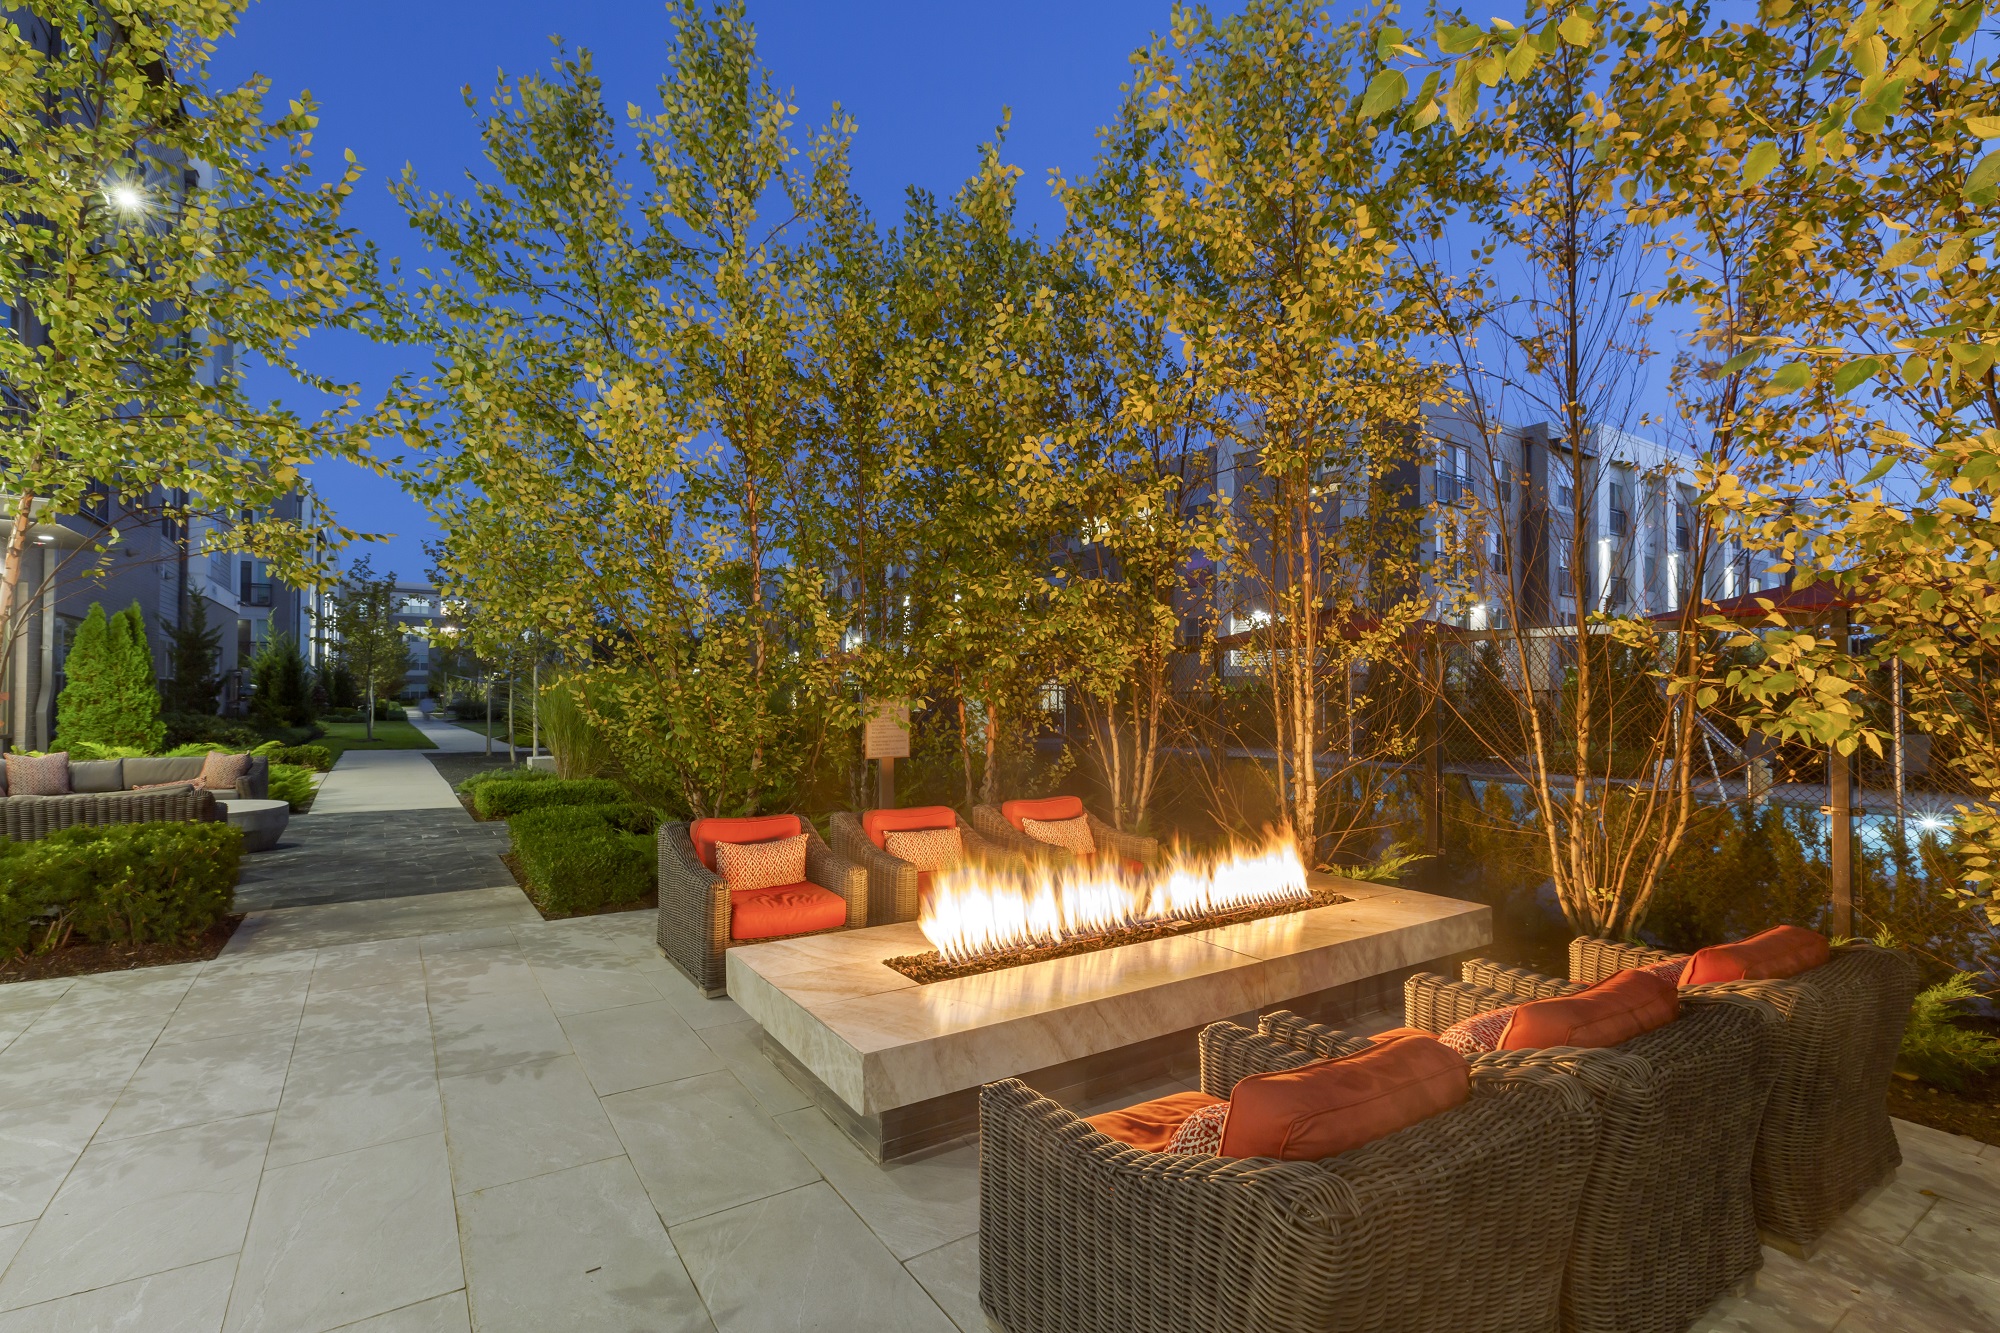 Dusk shot showing outdoor seating by the swimming pool and fire pit